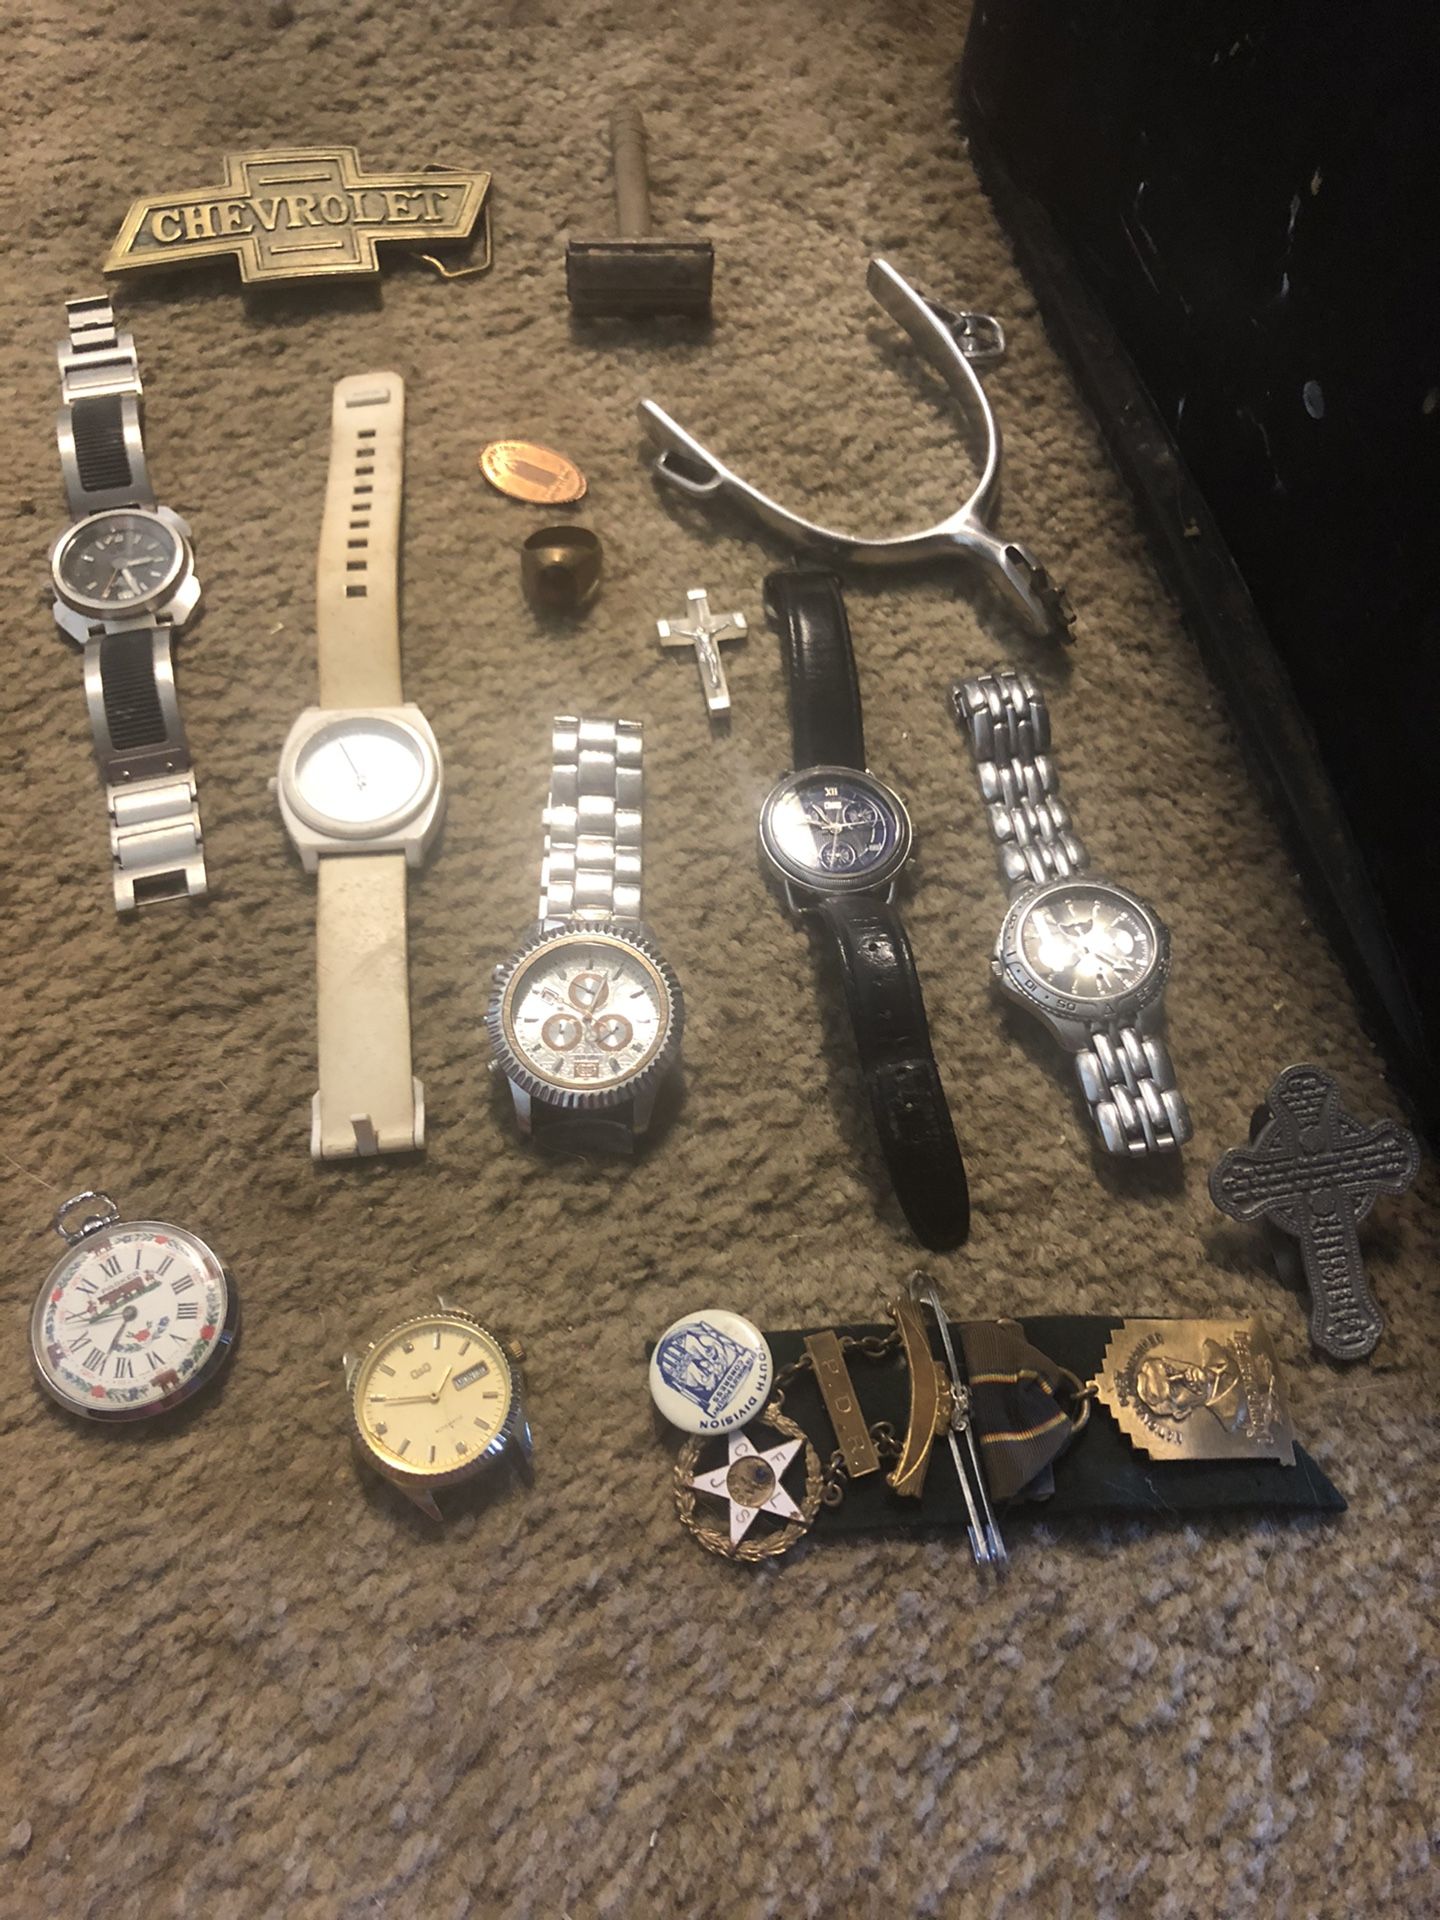 Old watches and misc.